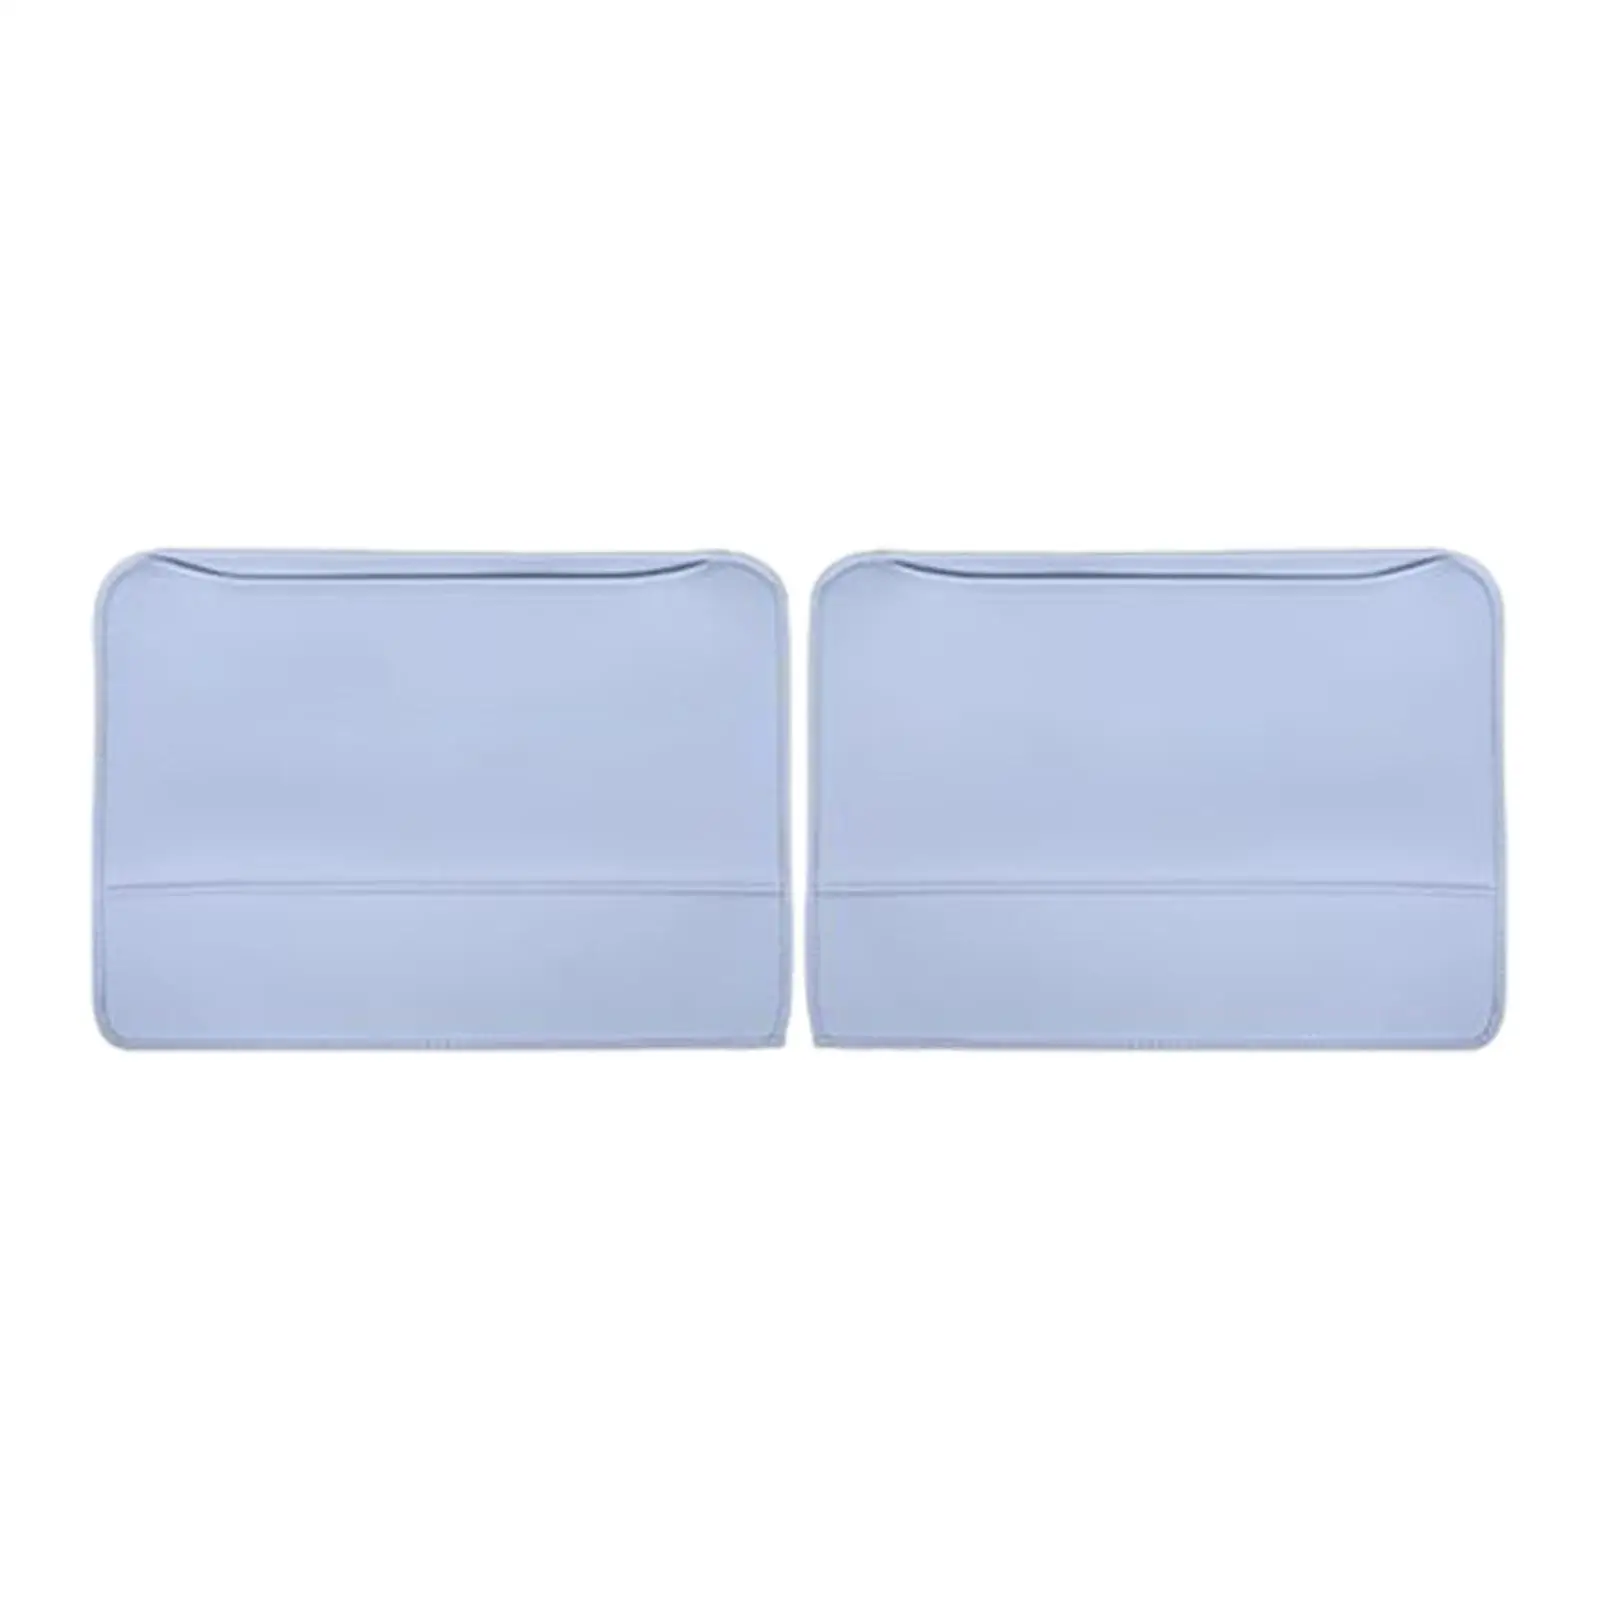 2x Seat Back Kick Mats Keep Clean and Neat with Storage Bag Prevent Dust and Trampling Car Back Seat Pad Cover for Byd Seal